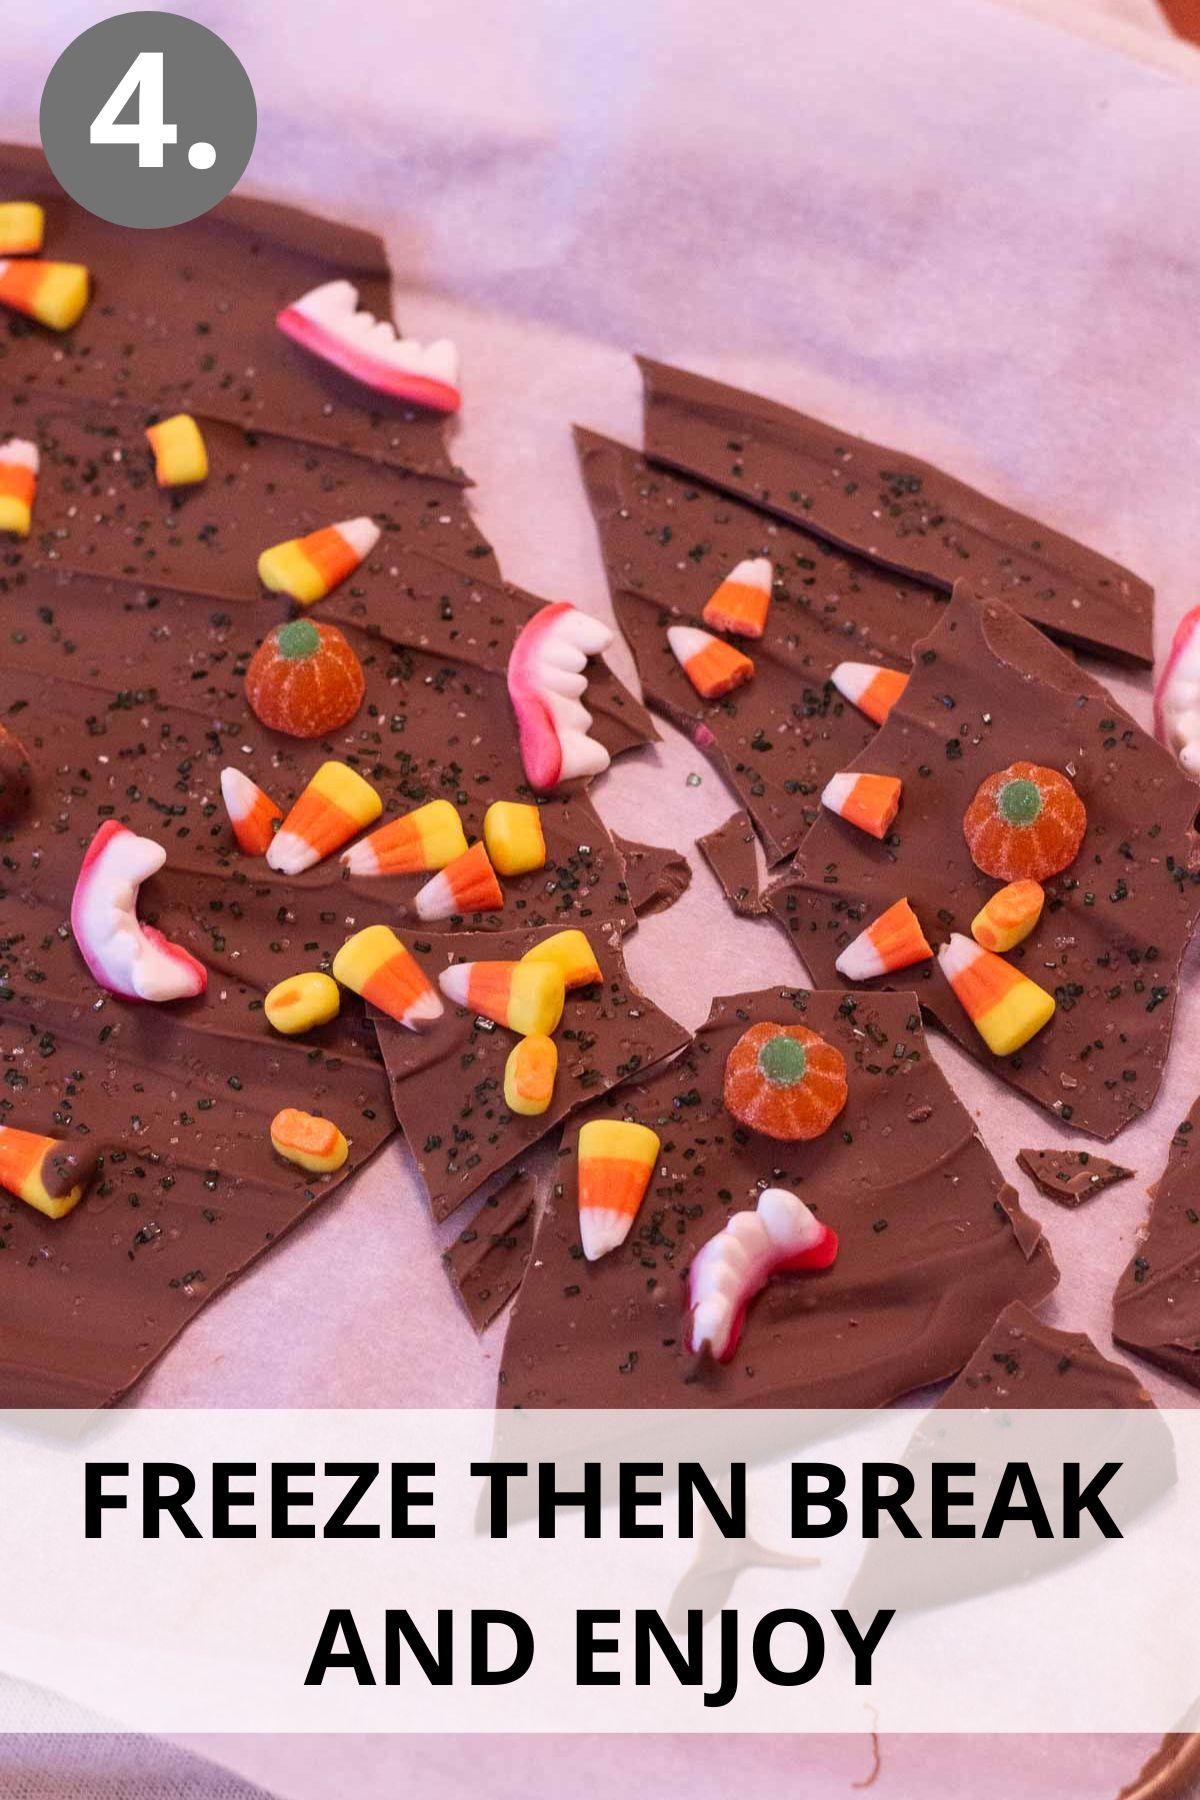 Halloween Bark step by step instructions